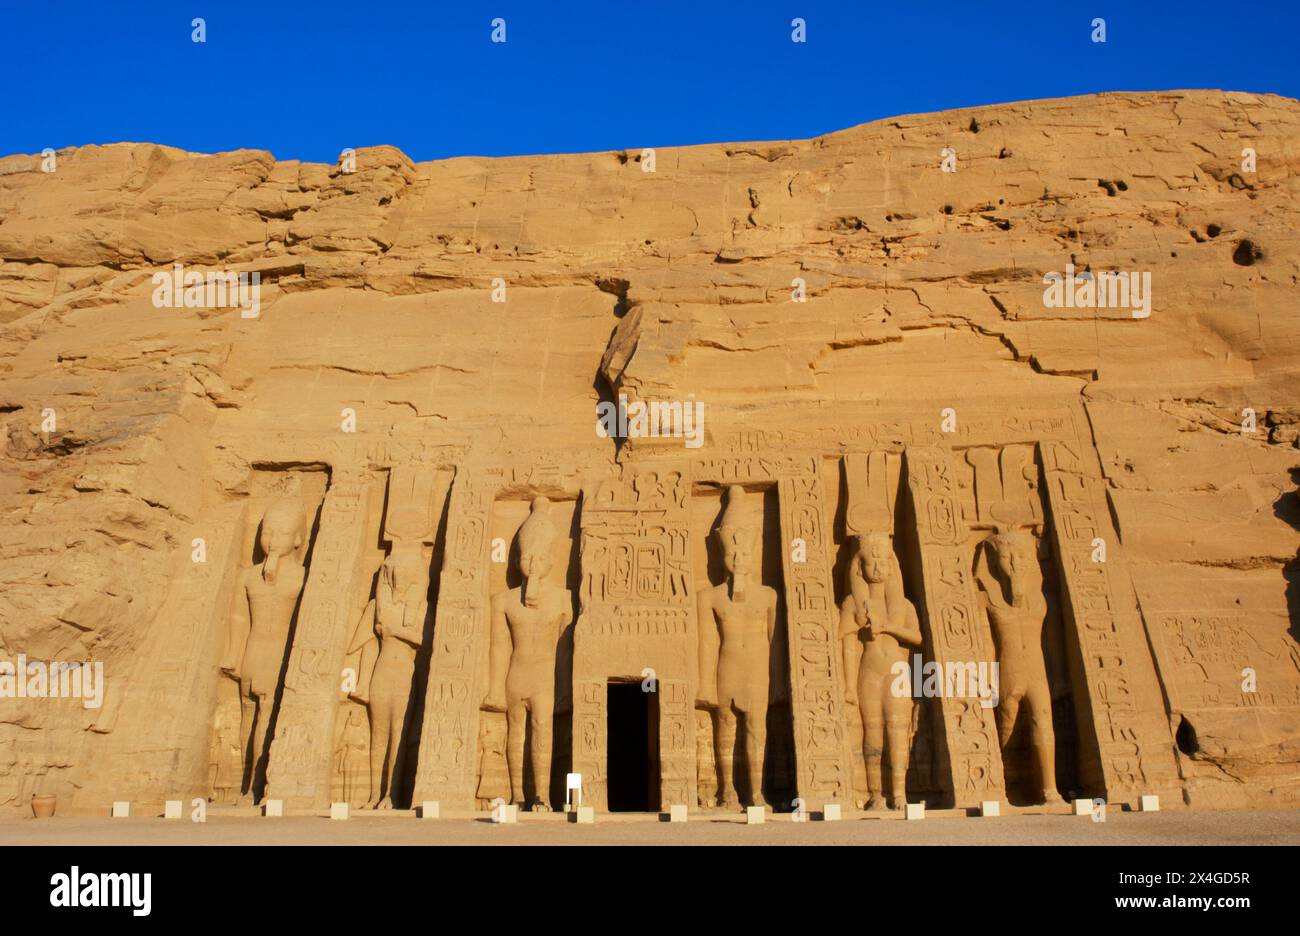 Abu Simbel, Egypt. Temple of Hathor or Temple of Nefertari, or also called Small Temple. It was built during the reign of Pharaoh Ramesses II (ca. 1279 BC-1213 BC) and dedicated to his wife, Queen Nefertari. View of the facade. Stock Photo